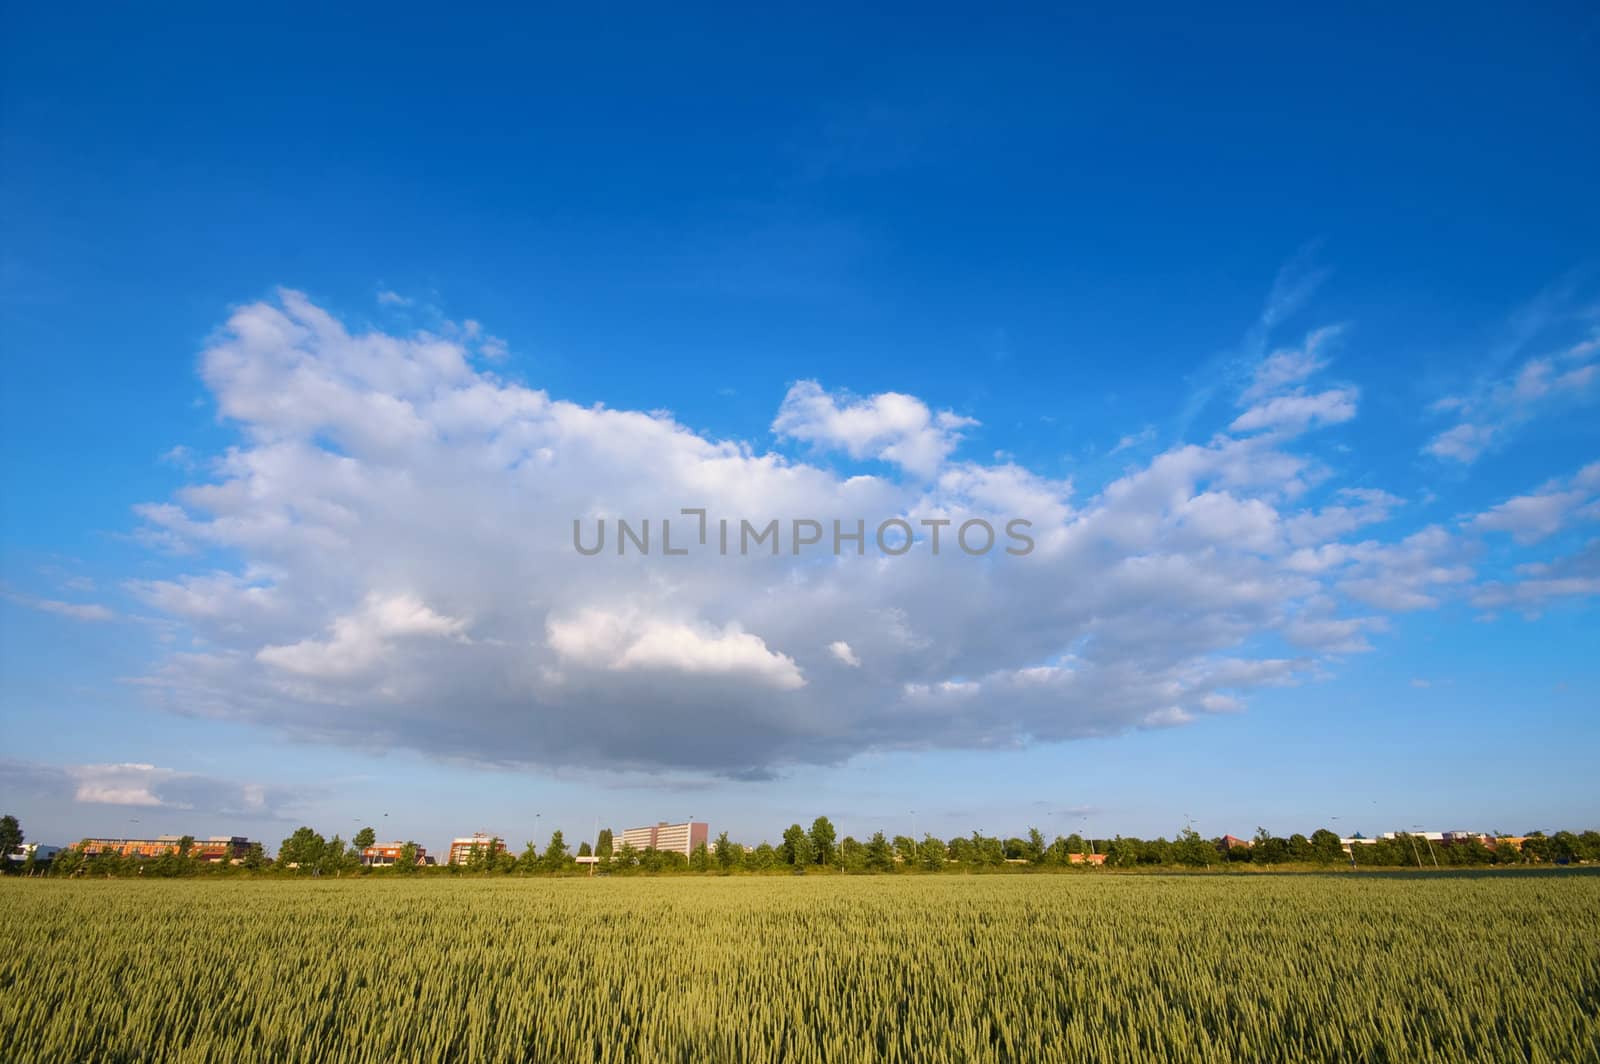 very big cloud hanging over a city and farmland
